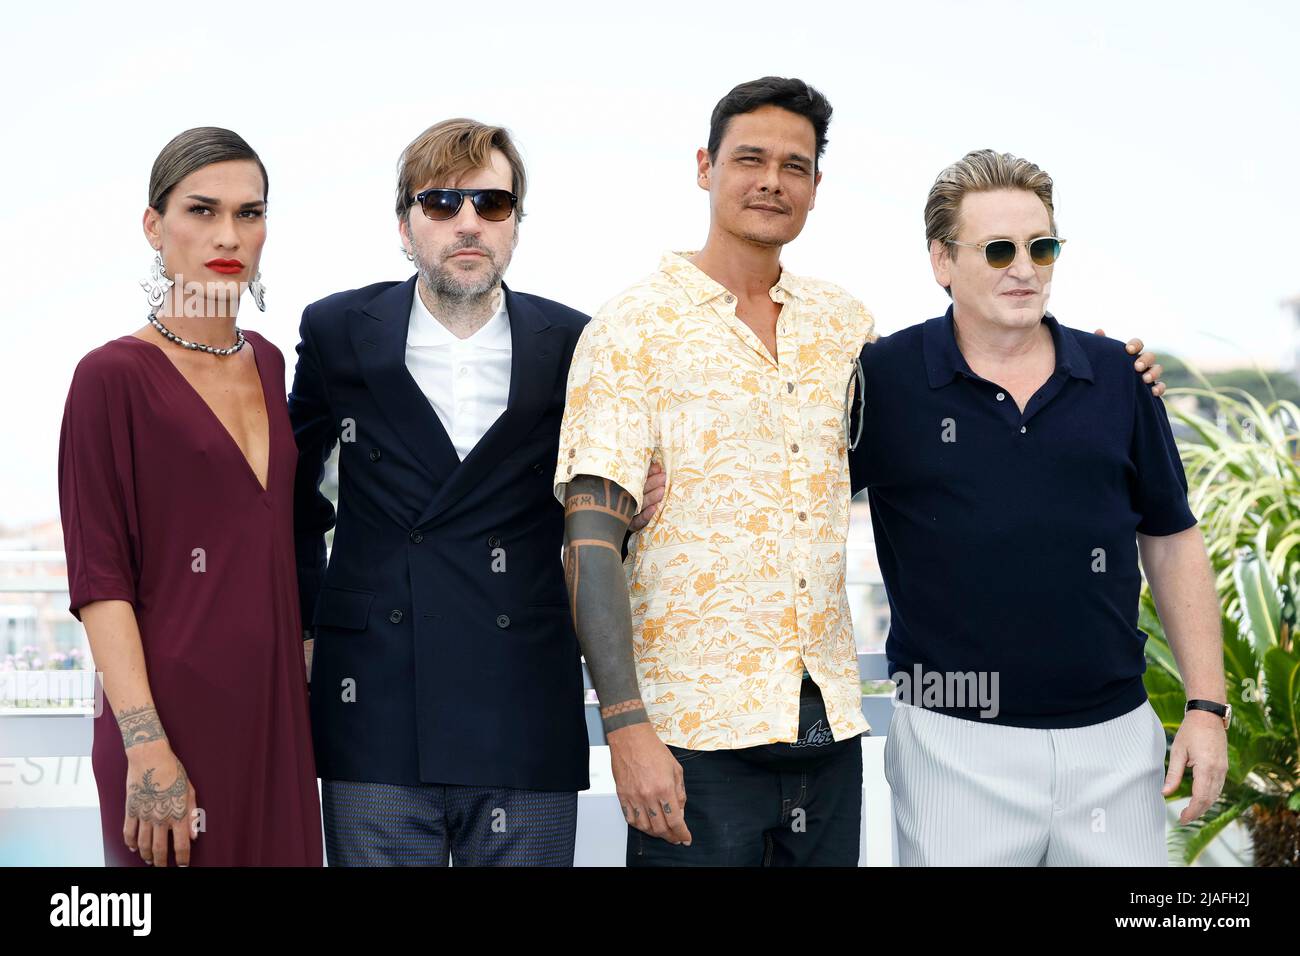 Pahoa Mahagafanau (Shanna) (l-r), Albert Serra, Matahi Pambrun and Benoit Magimel pose at the photocall of 'Pacification' during the 75th Cannes Film Festival, Festival de Cannes, at Palais des Festivals in Cannes, France, on 27 May 2022. Stock Photo